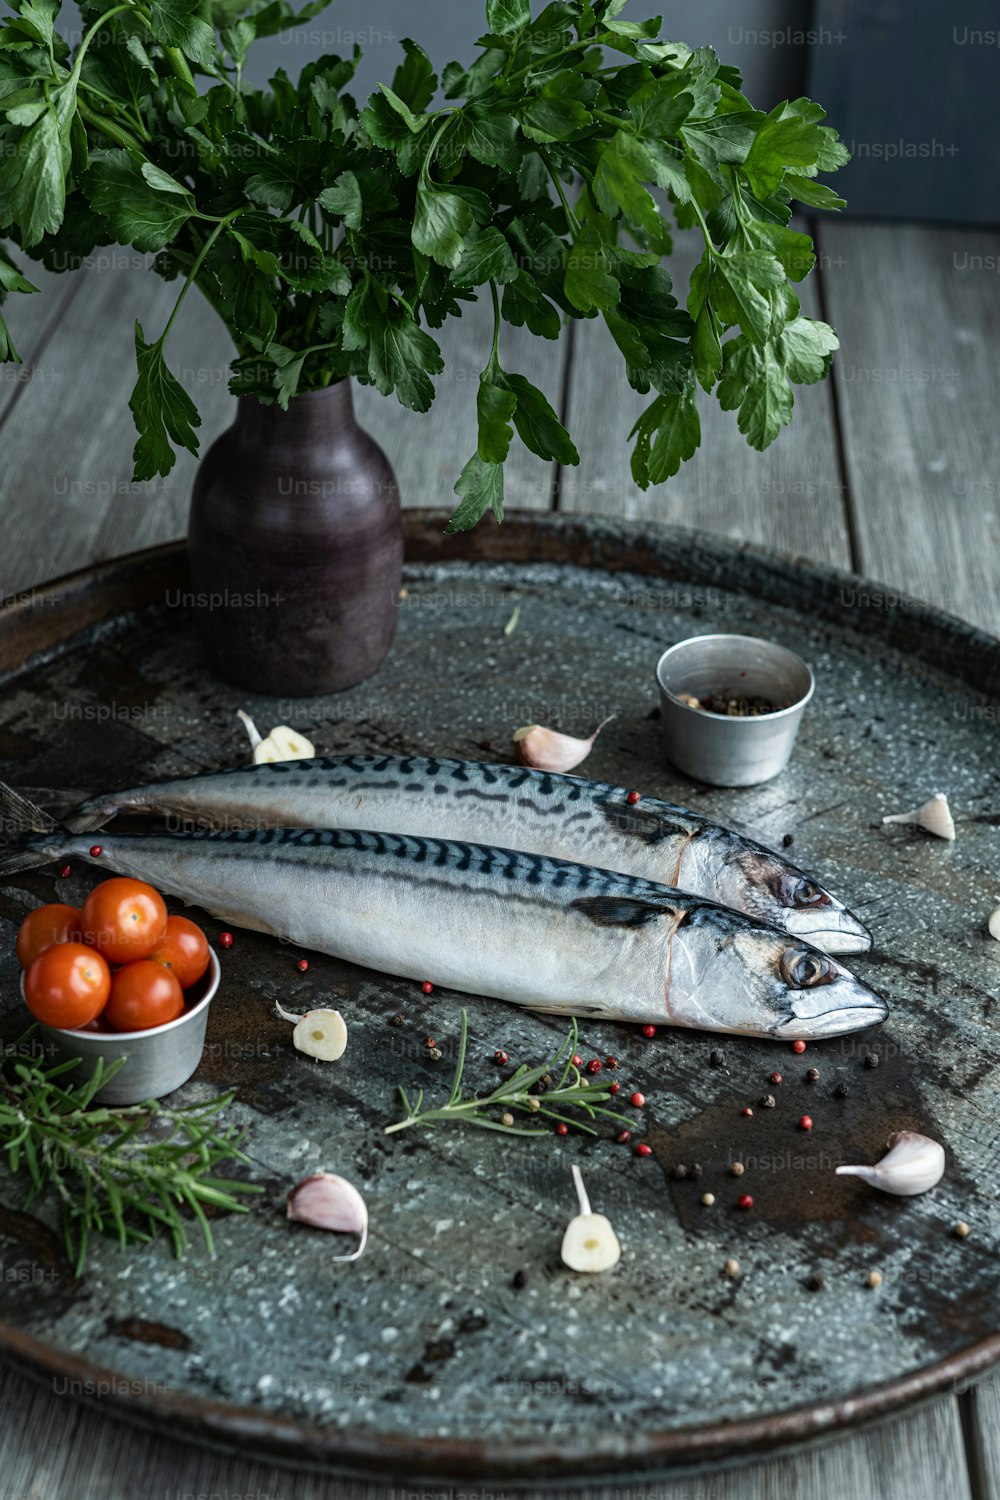 A couple of fish sitting on top of a metal tray photo – Fresh fish